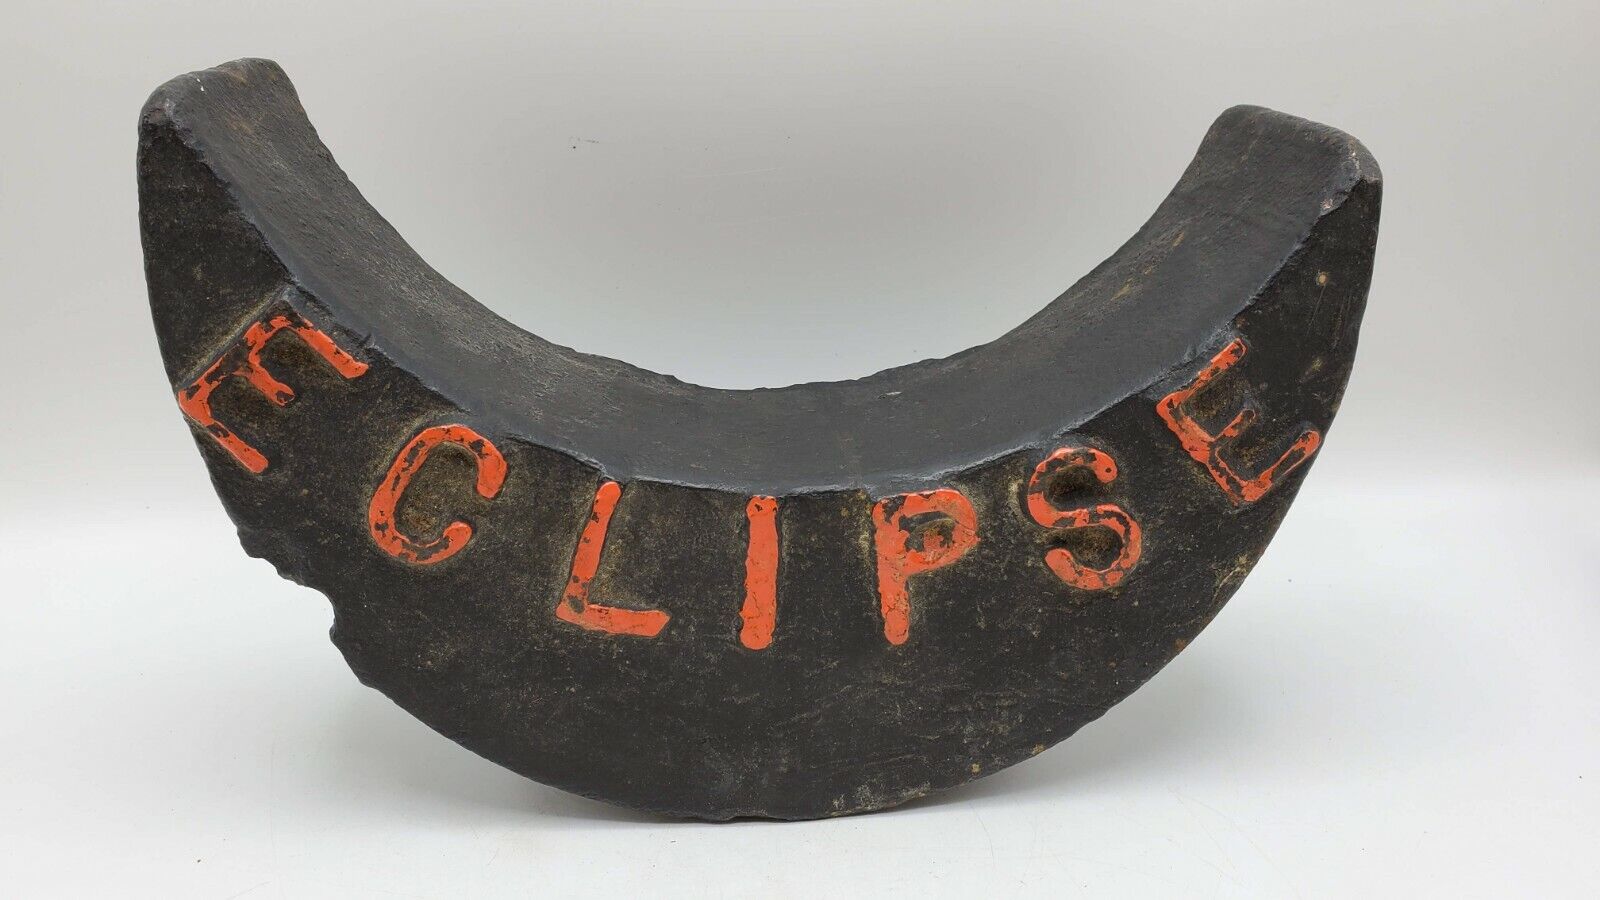 Antique Eclipse Cast Iron Crescent Moon B13 Windmill Weight Painted 26lb - Rare